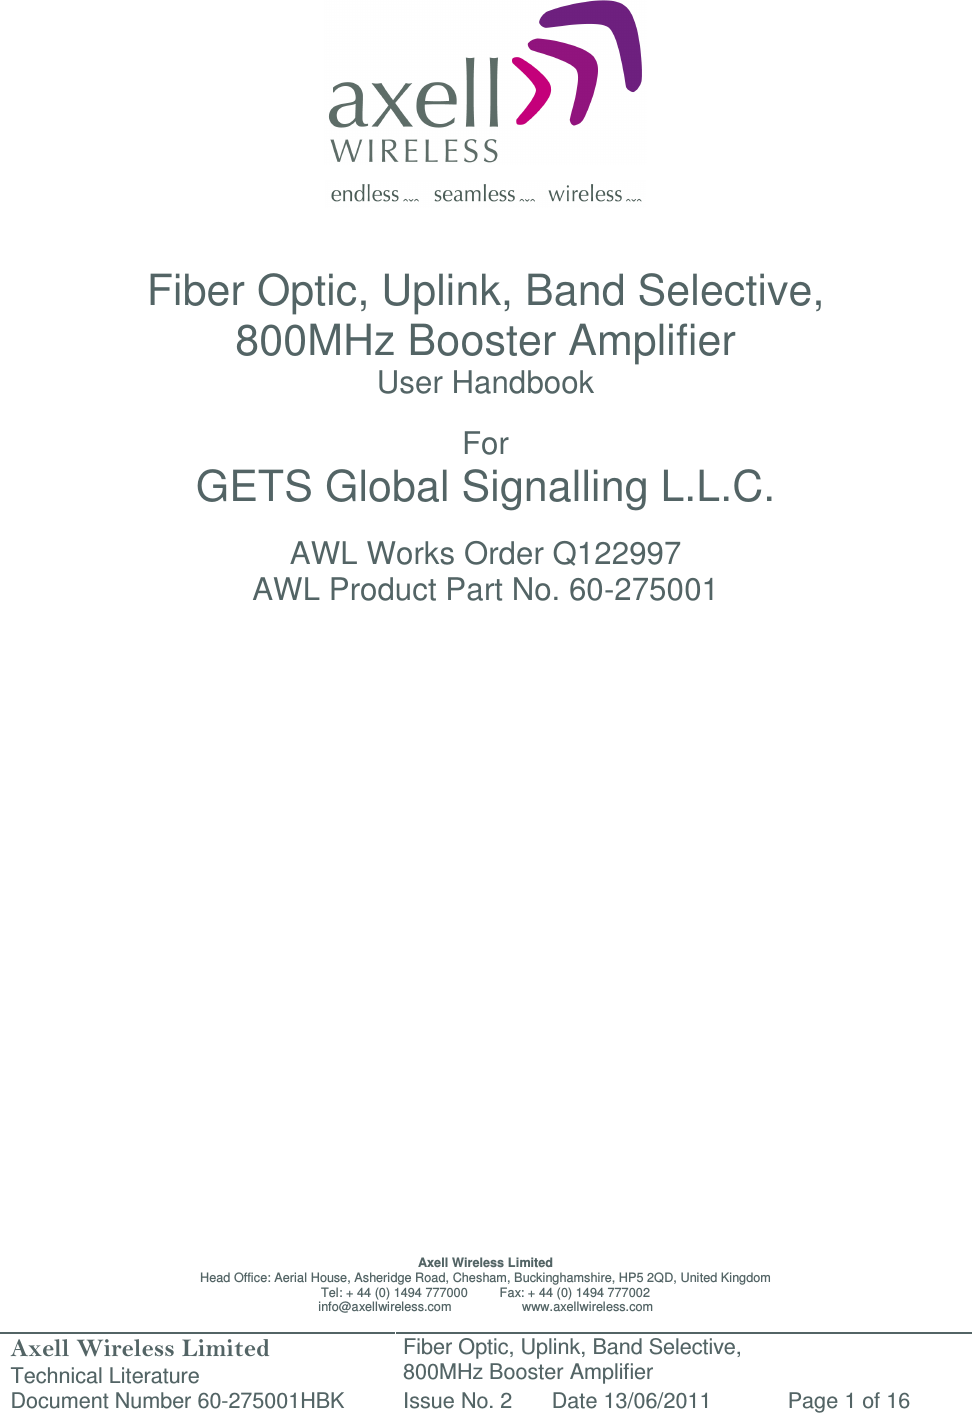 Axell Wireless Limited Technical Literature Fiber Optic, Uplink, Band Selective,  800MHz Booster Amplifier  Document Number 60-275001HBK Issue No. 2 Date 13/06/2011 Page 1 of 16                   Fiber Optic, Uplink, Band Selective,  800MHz Booster Amplifier  User Handbook  For GETS Global Signalling L.L.C.  AWL Works Order Q122997 AWL Product Part No. 60-275001                           Axell Wireless Limited Head Office: Aerial House, Asheridge Road, Chesham, Buckinghamshire, HP5 2QD, United Kingdom Tel: + 44 (0) 1494 777000         Fax: + 44 (0) 1494 777002 info@axellwireless.com                    www.axellwireless.com 